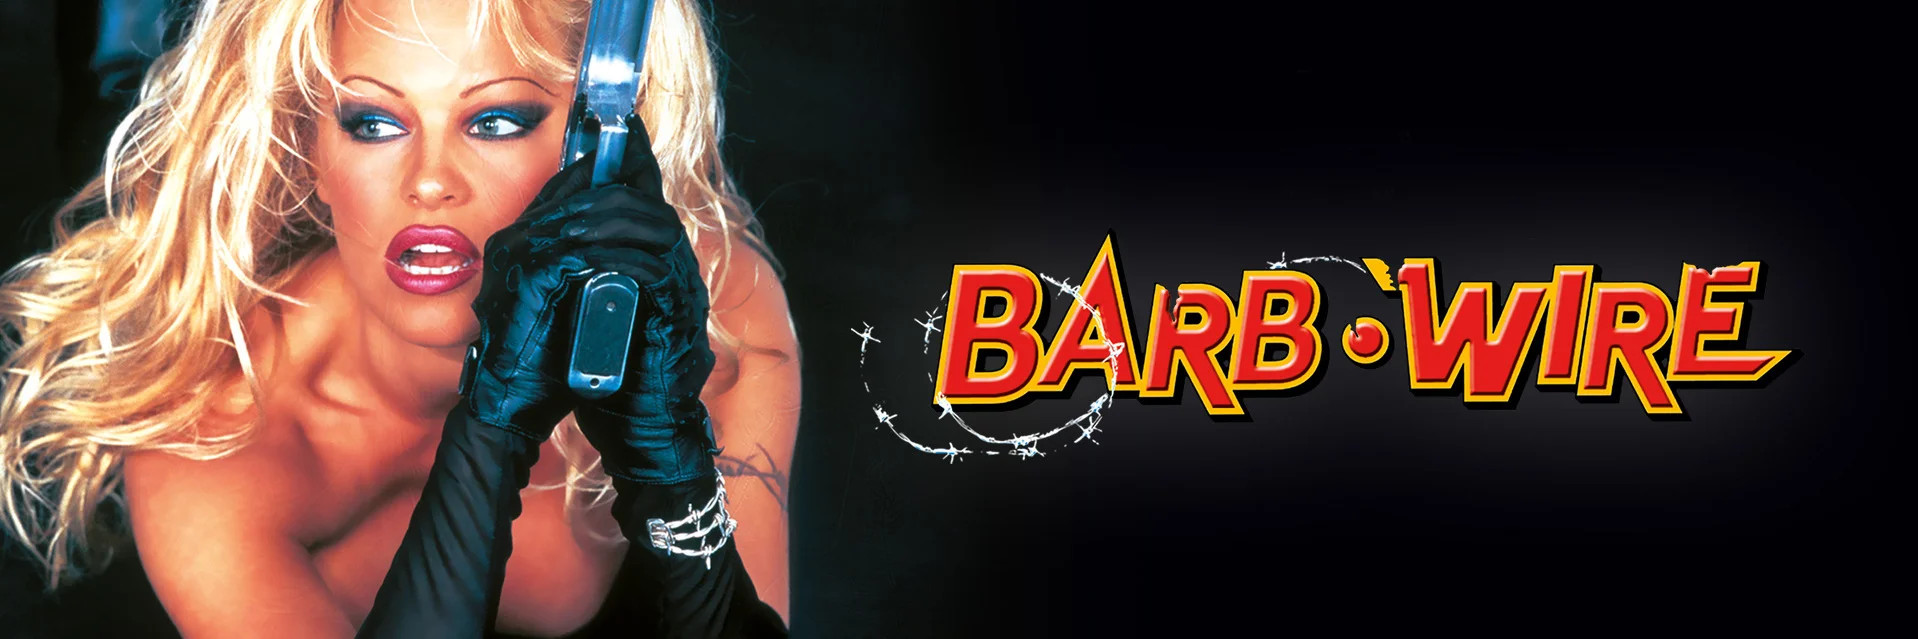 Barb Wire 4K 1996 big poster